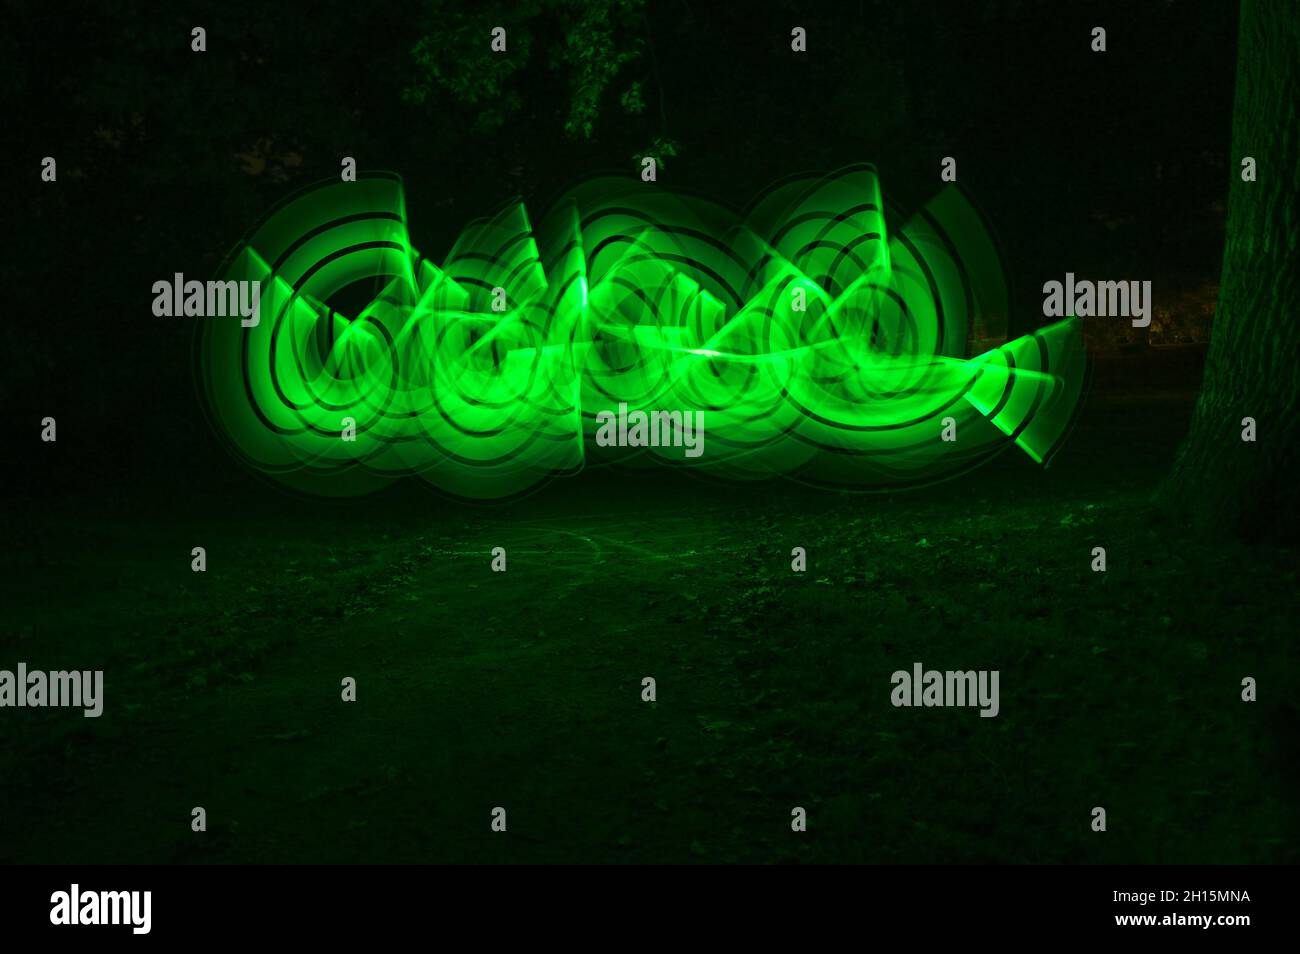 Freehand light painting in the form of green glowing curves in a dark park at night, abstract art, long exposure with motion blur, copy space, selecte Stock Photo